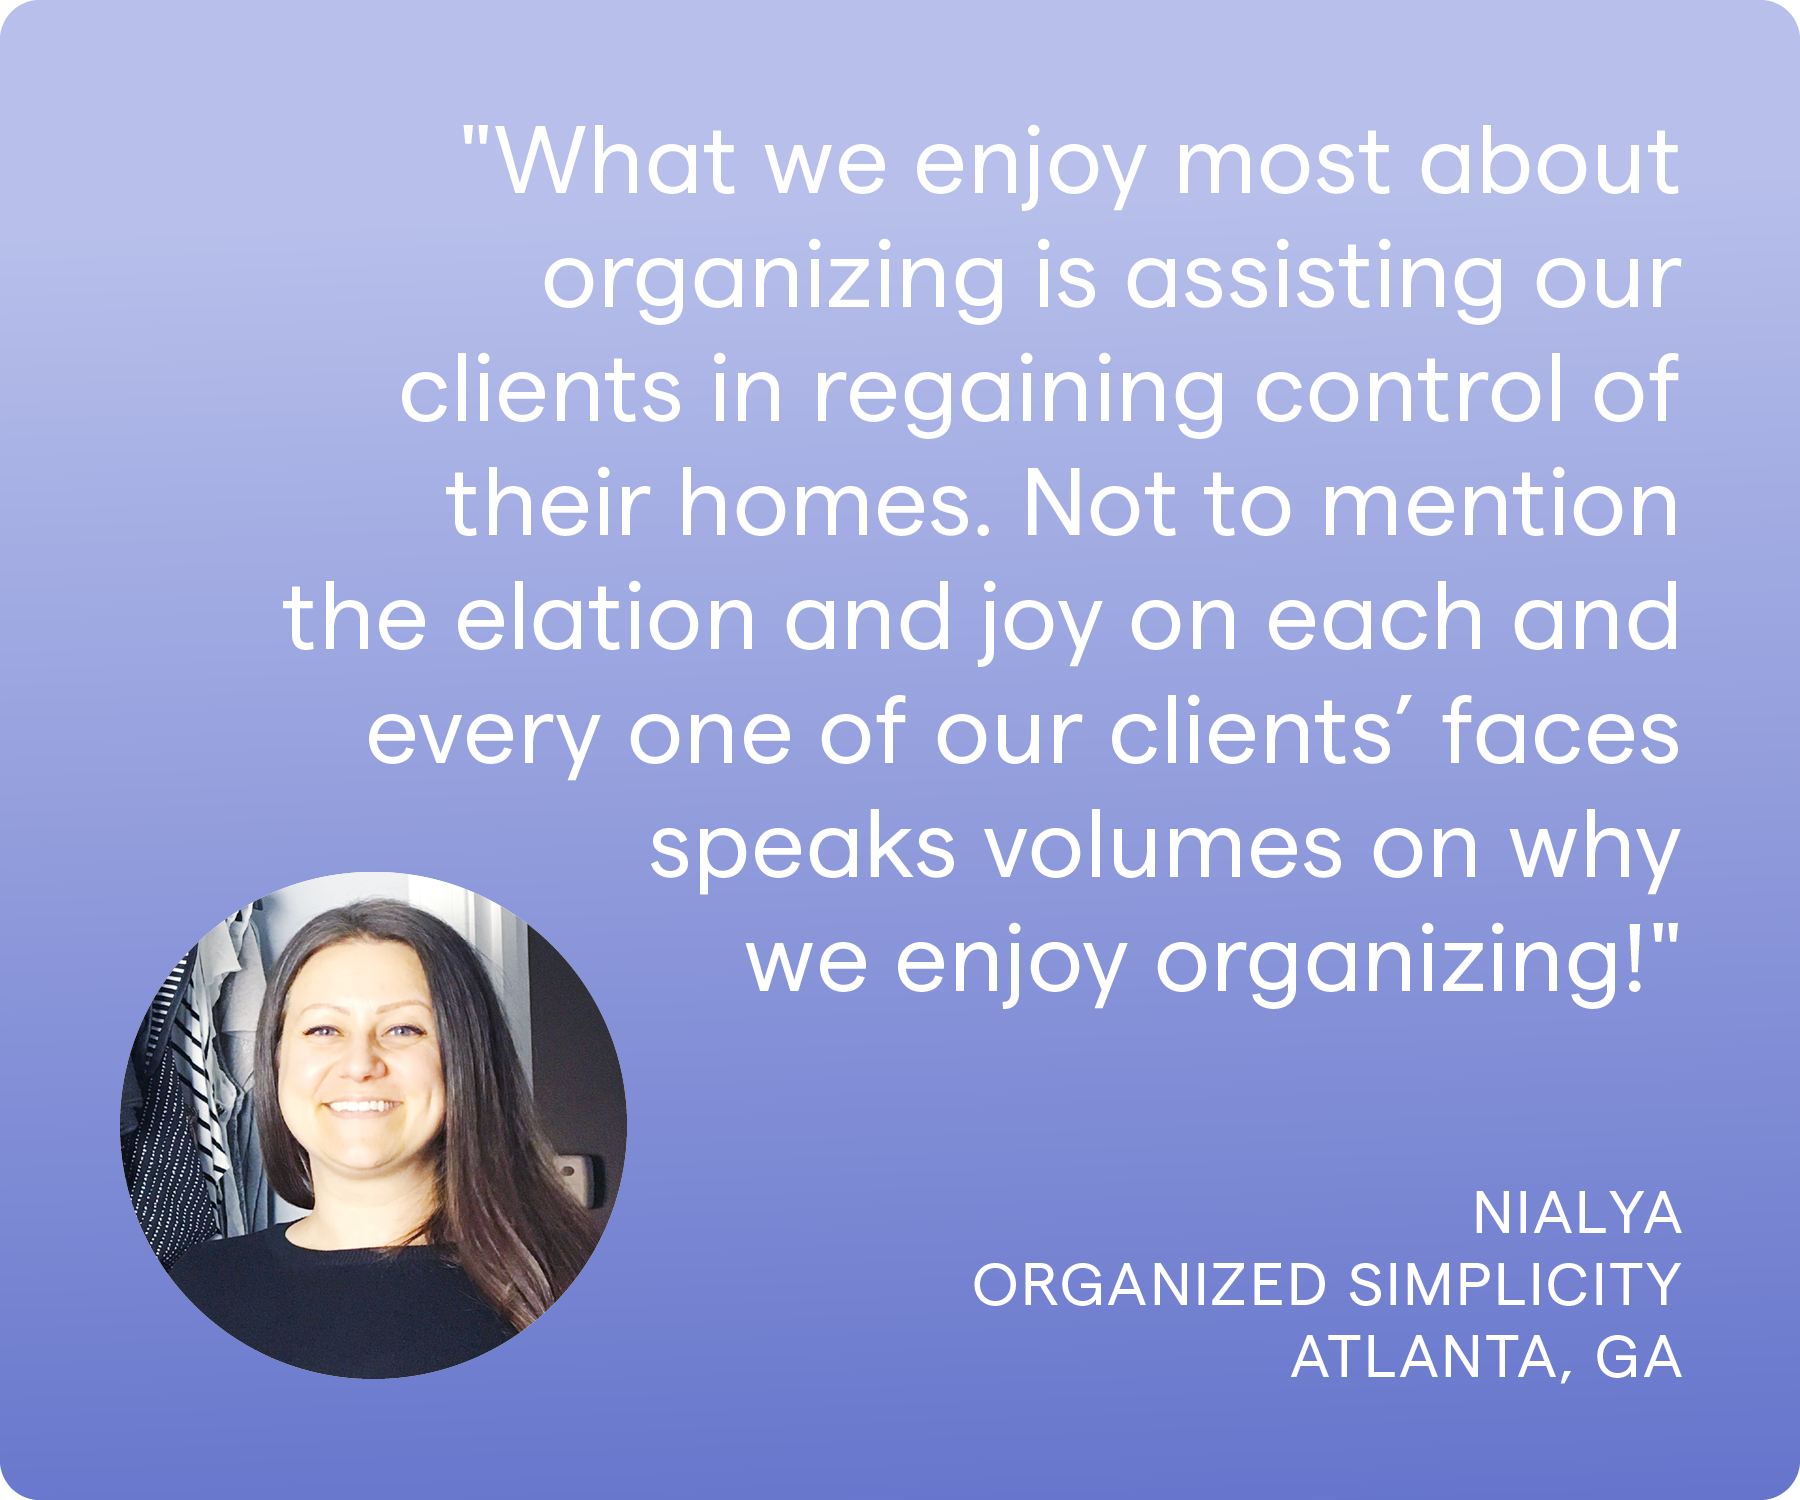 'What we enjoy most about organizing is assisting our clients in regaining control of their homes. Not to mention the elation and joy on each and every one of our clients’ faces speaks volumes on why we enjoy organizing!' Nialya, Organized Simplicity, Atlanta